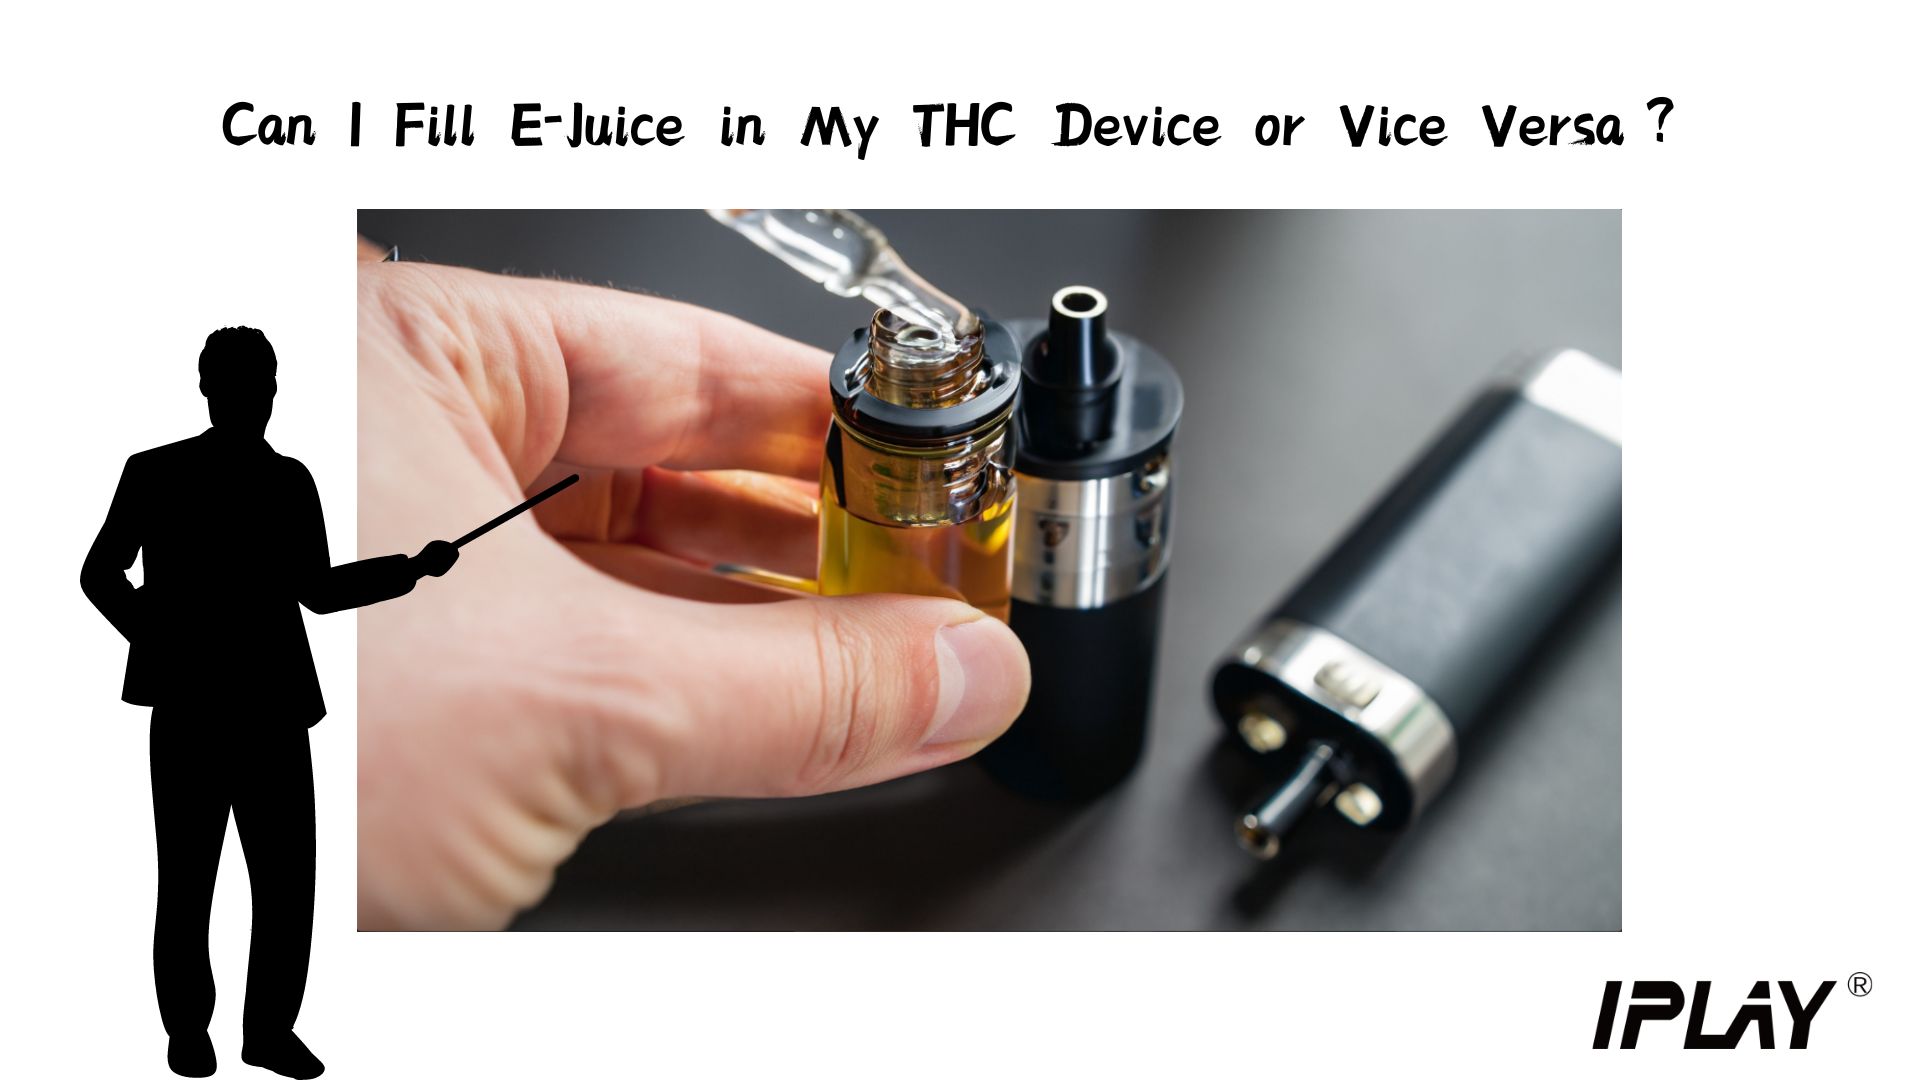 fill-e-juice-in-thc-device